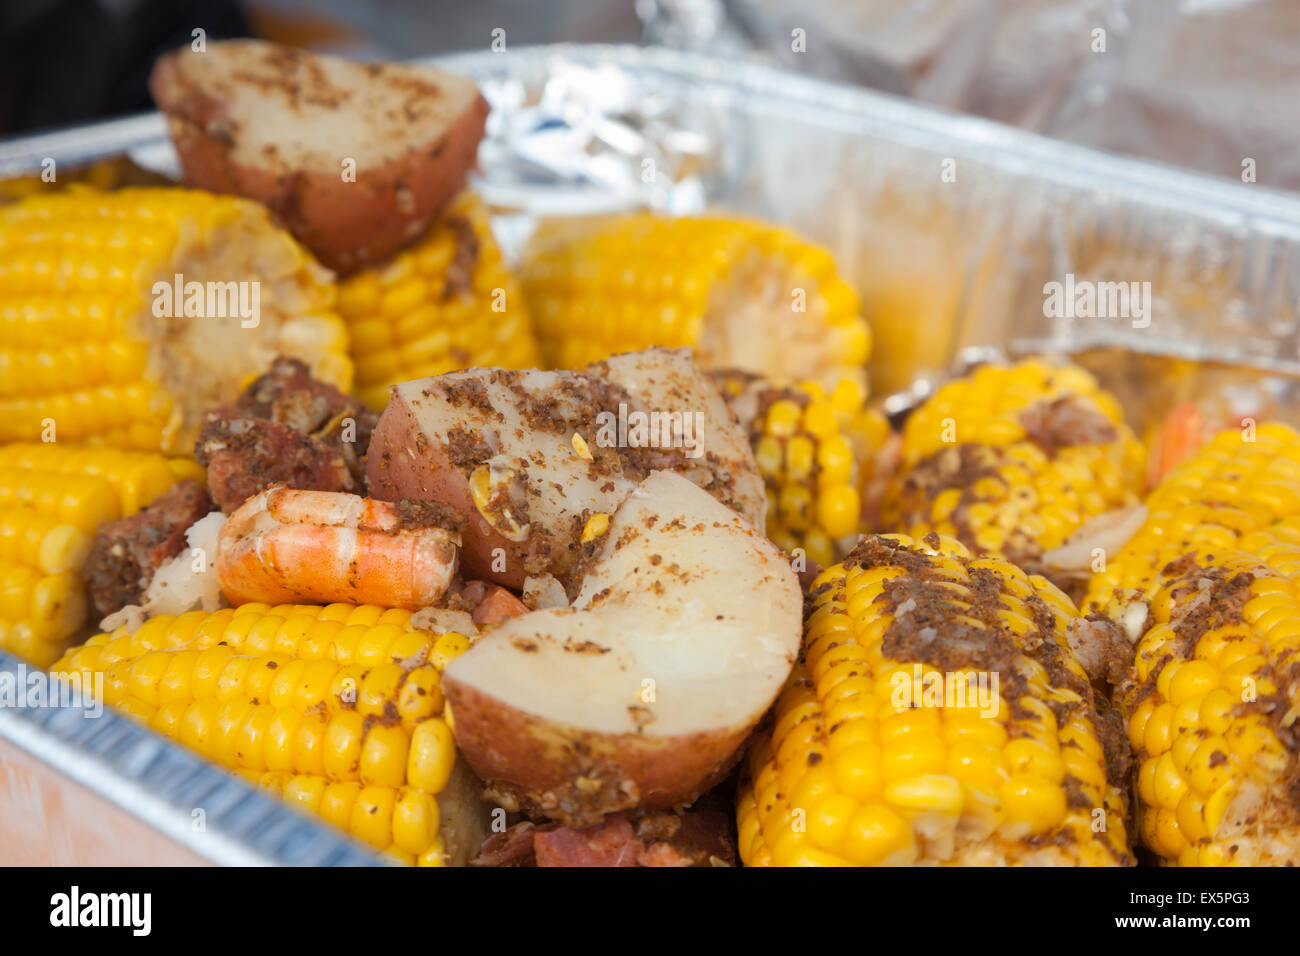 A traditional low country boil with red potatoes, corn on the cob, and shrimp. Stock Photo